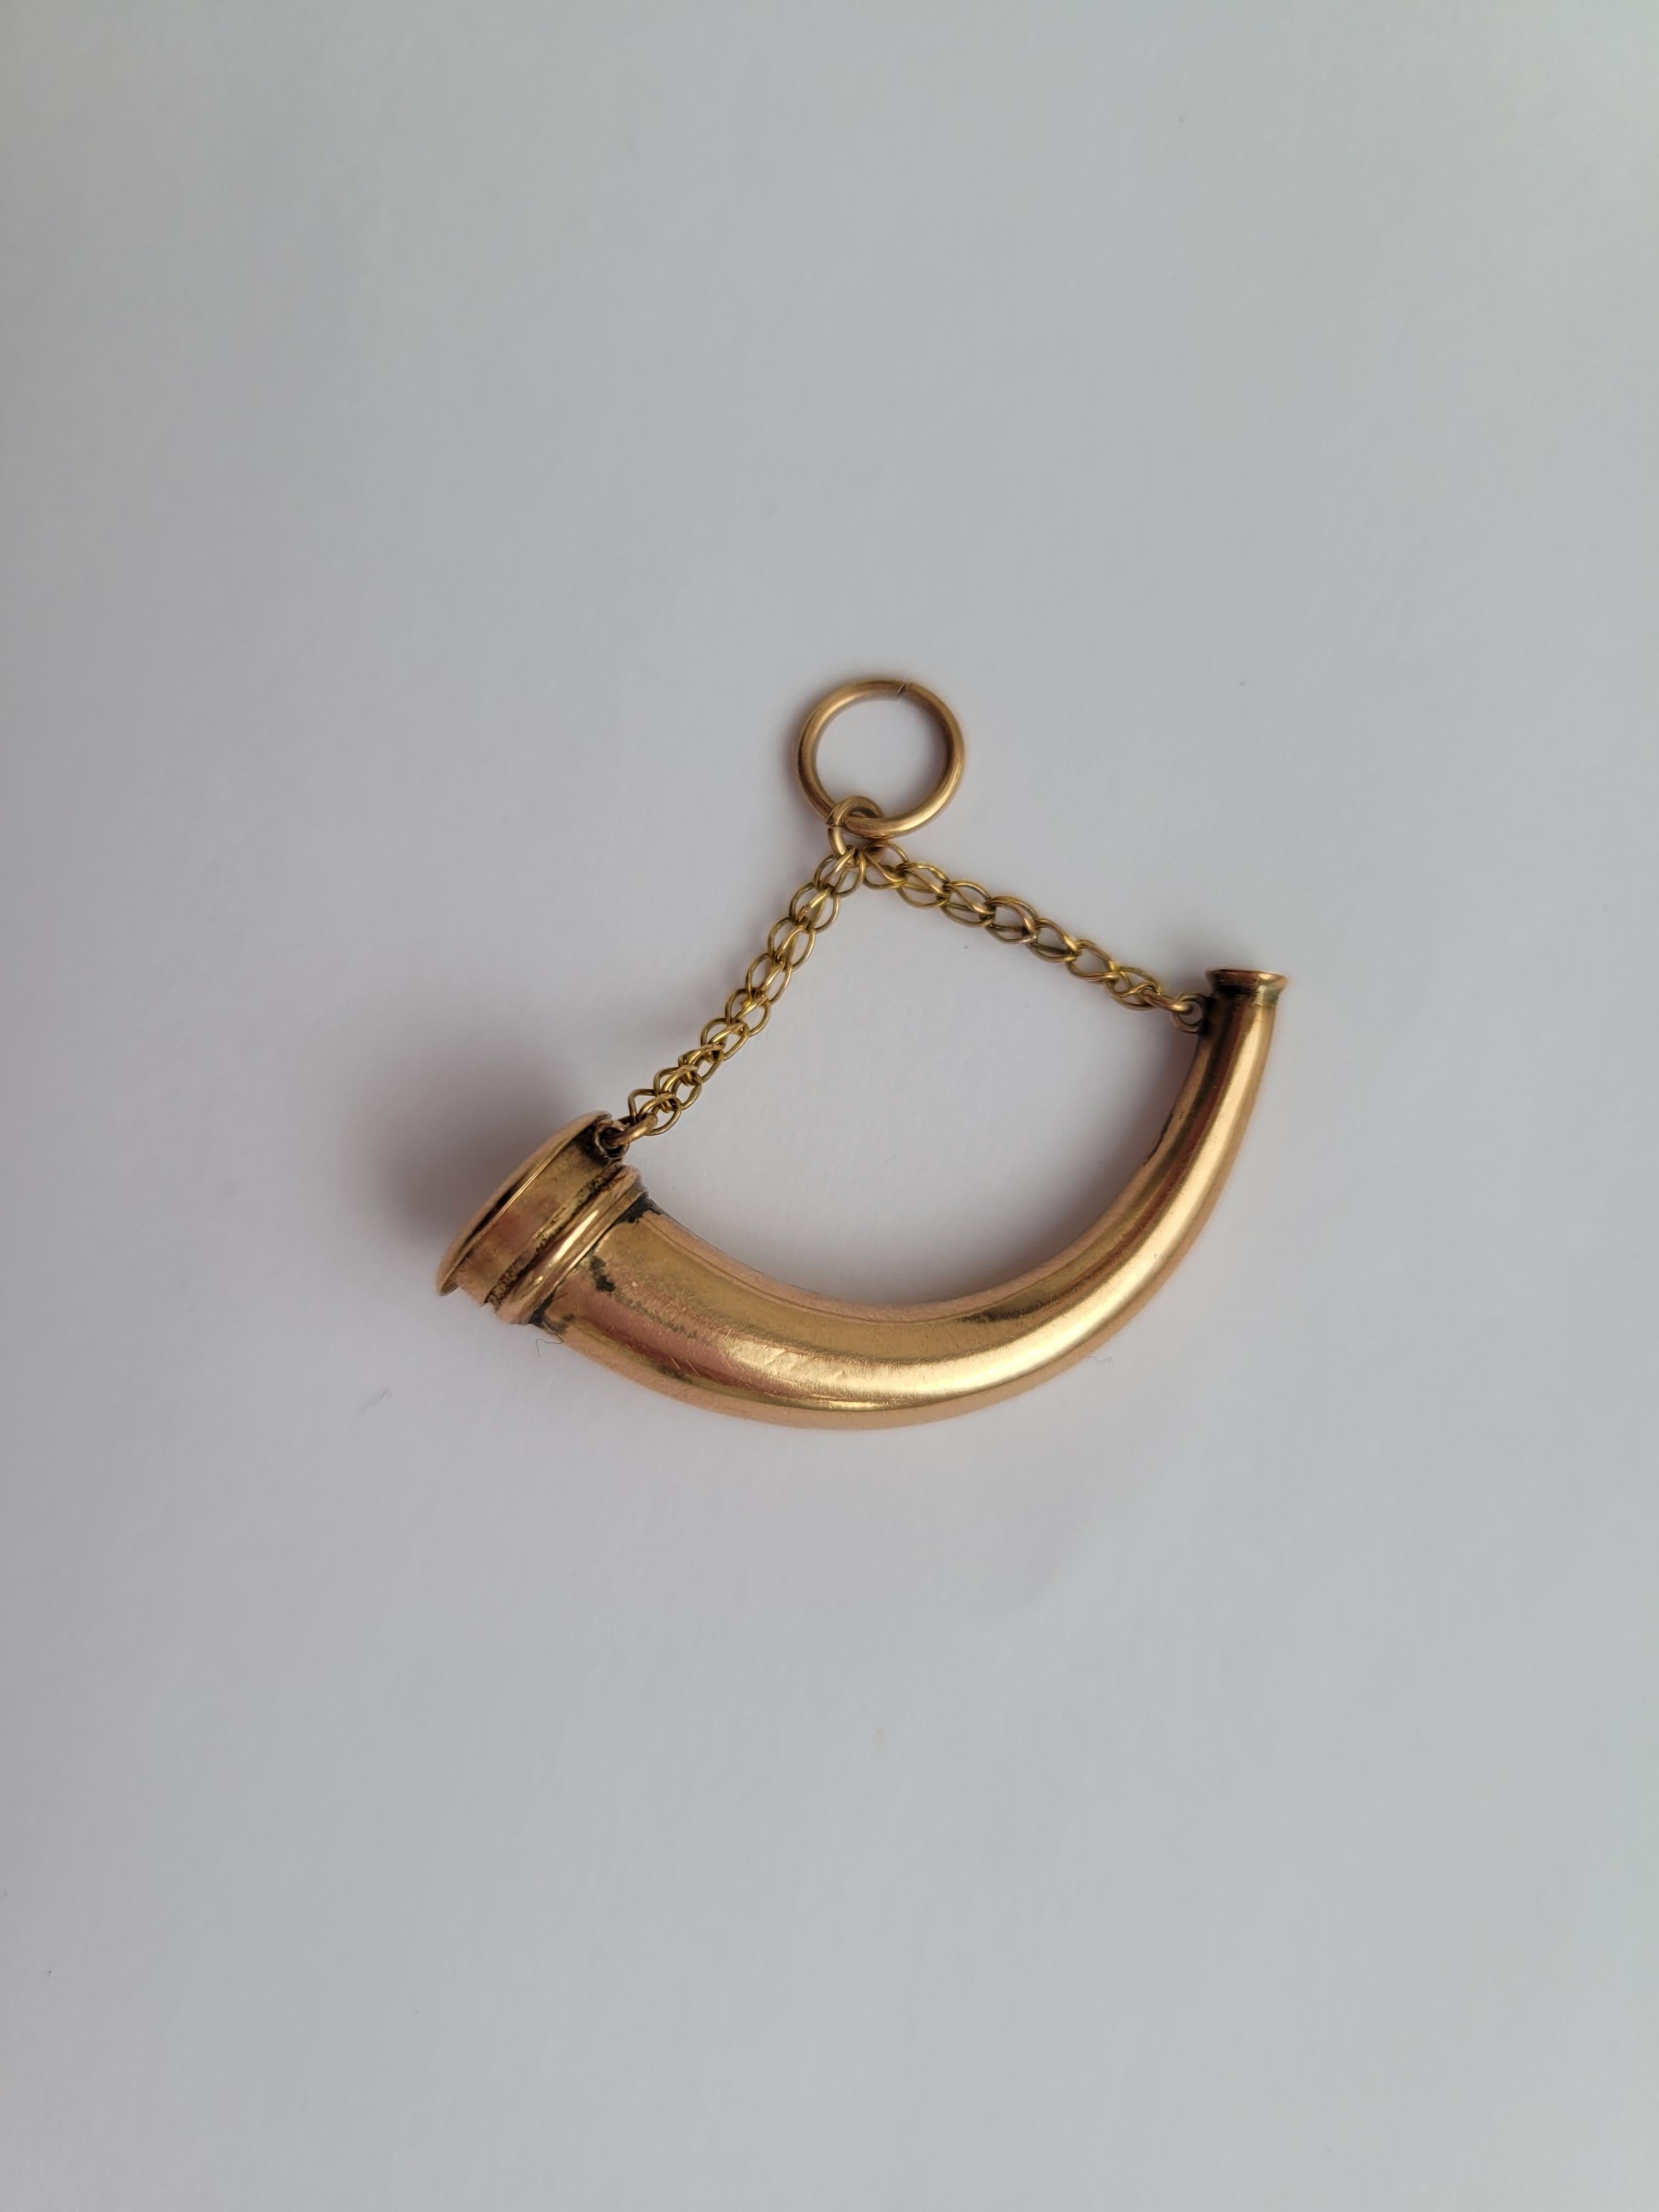 A Rare Victorian c.1870s Rose Gold Horn shaped snuff bottle pendant. Can be used as a locket to keep small objects. English origin.
Width 35mm.
Weight 1.9gr.
Unmarked, tested 9 Carat Gold.
Excellent condition for the age.